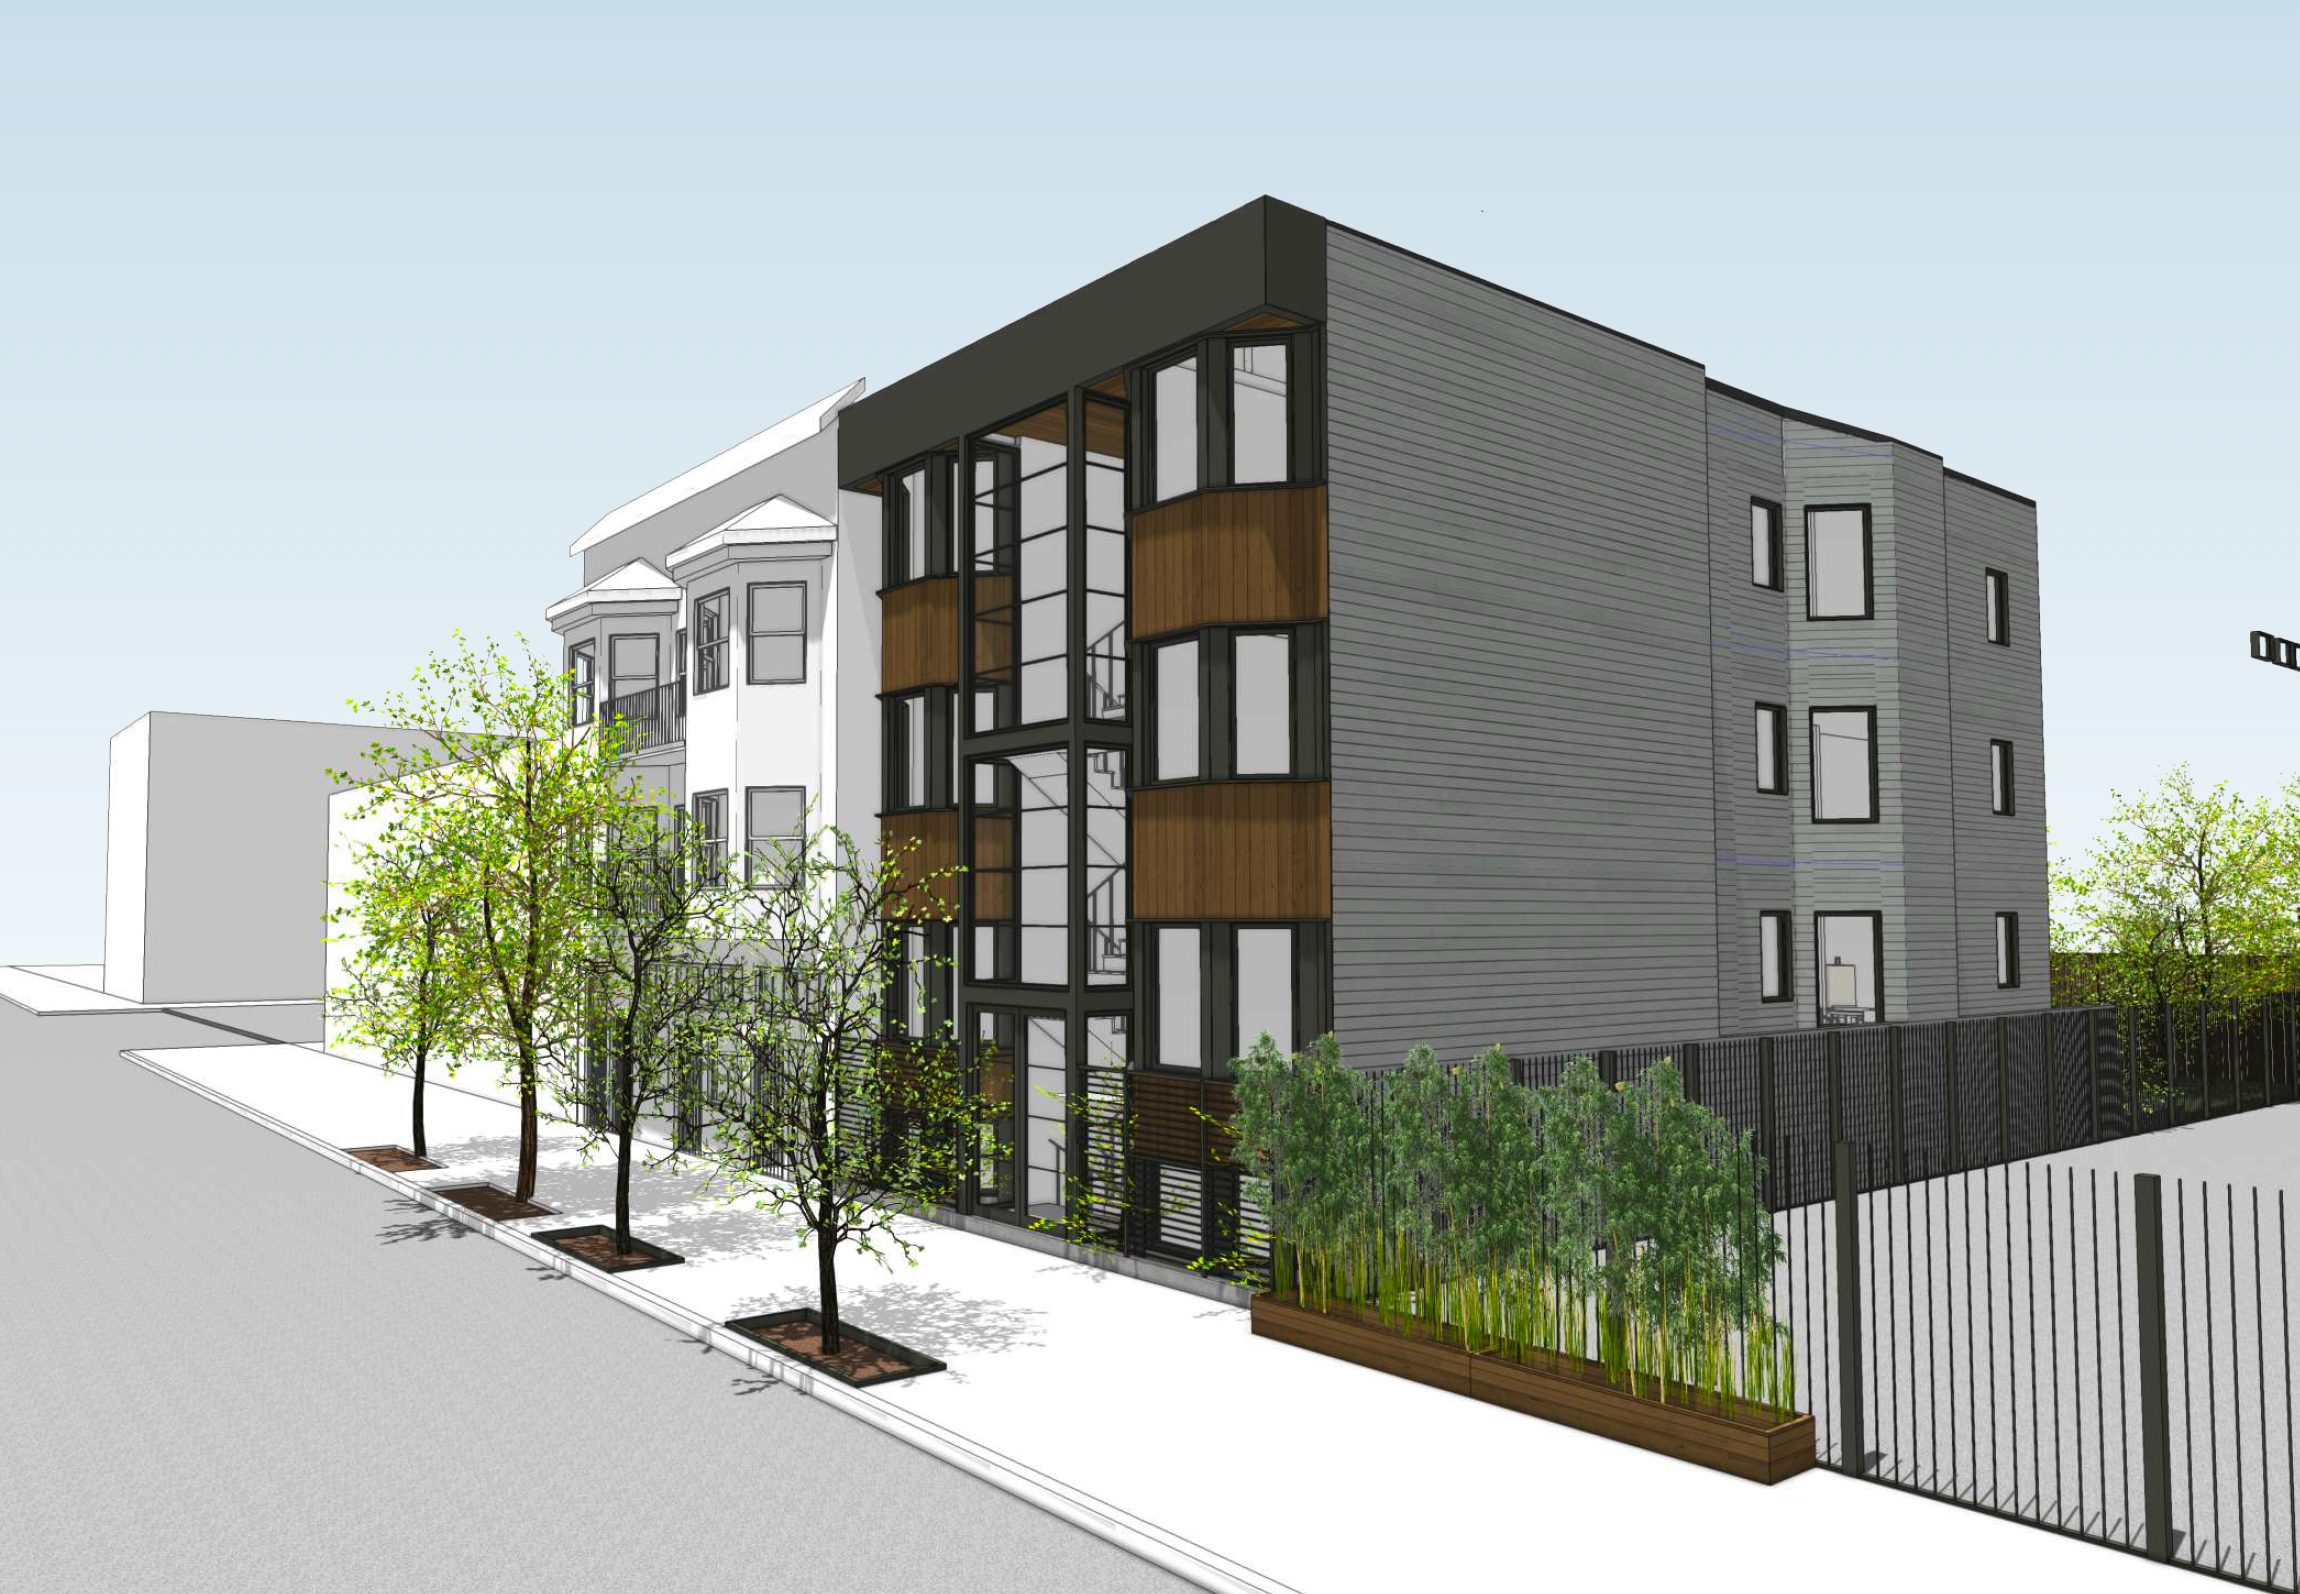 A rendering shows new housing planned for a currently empty building.